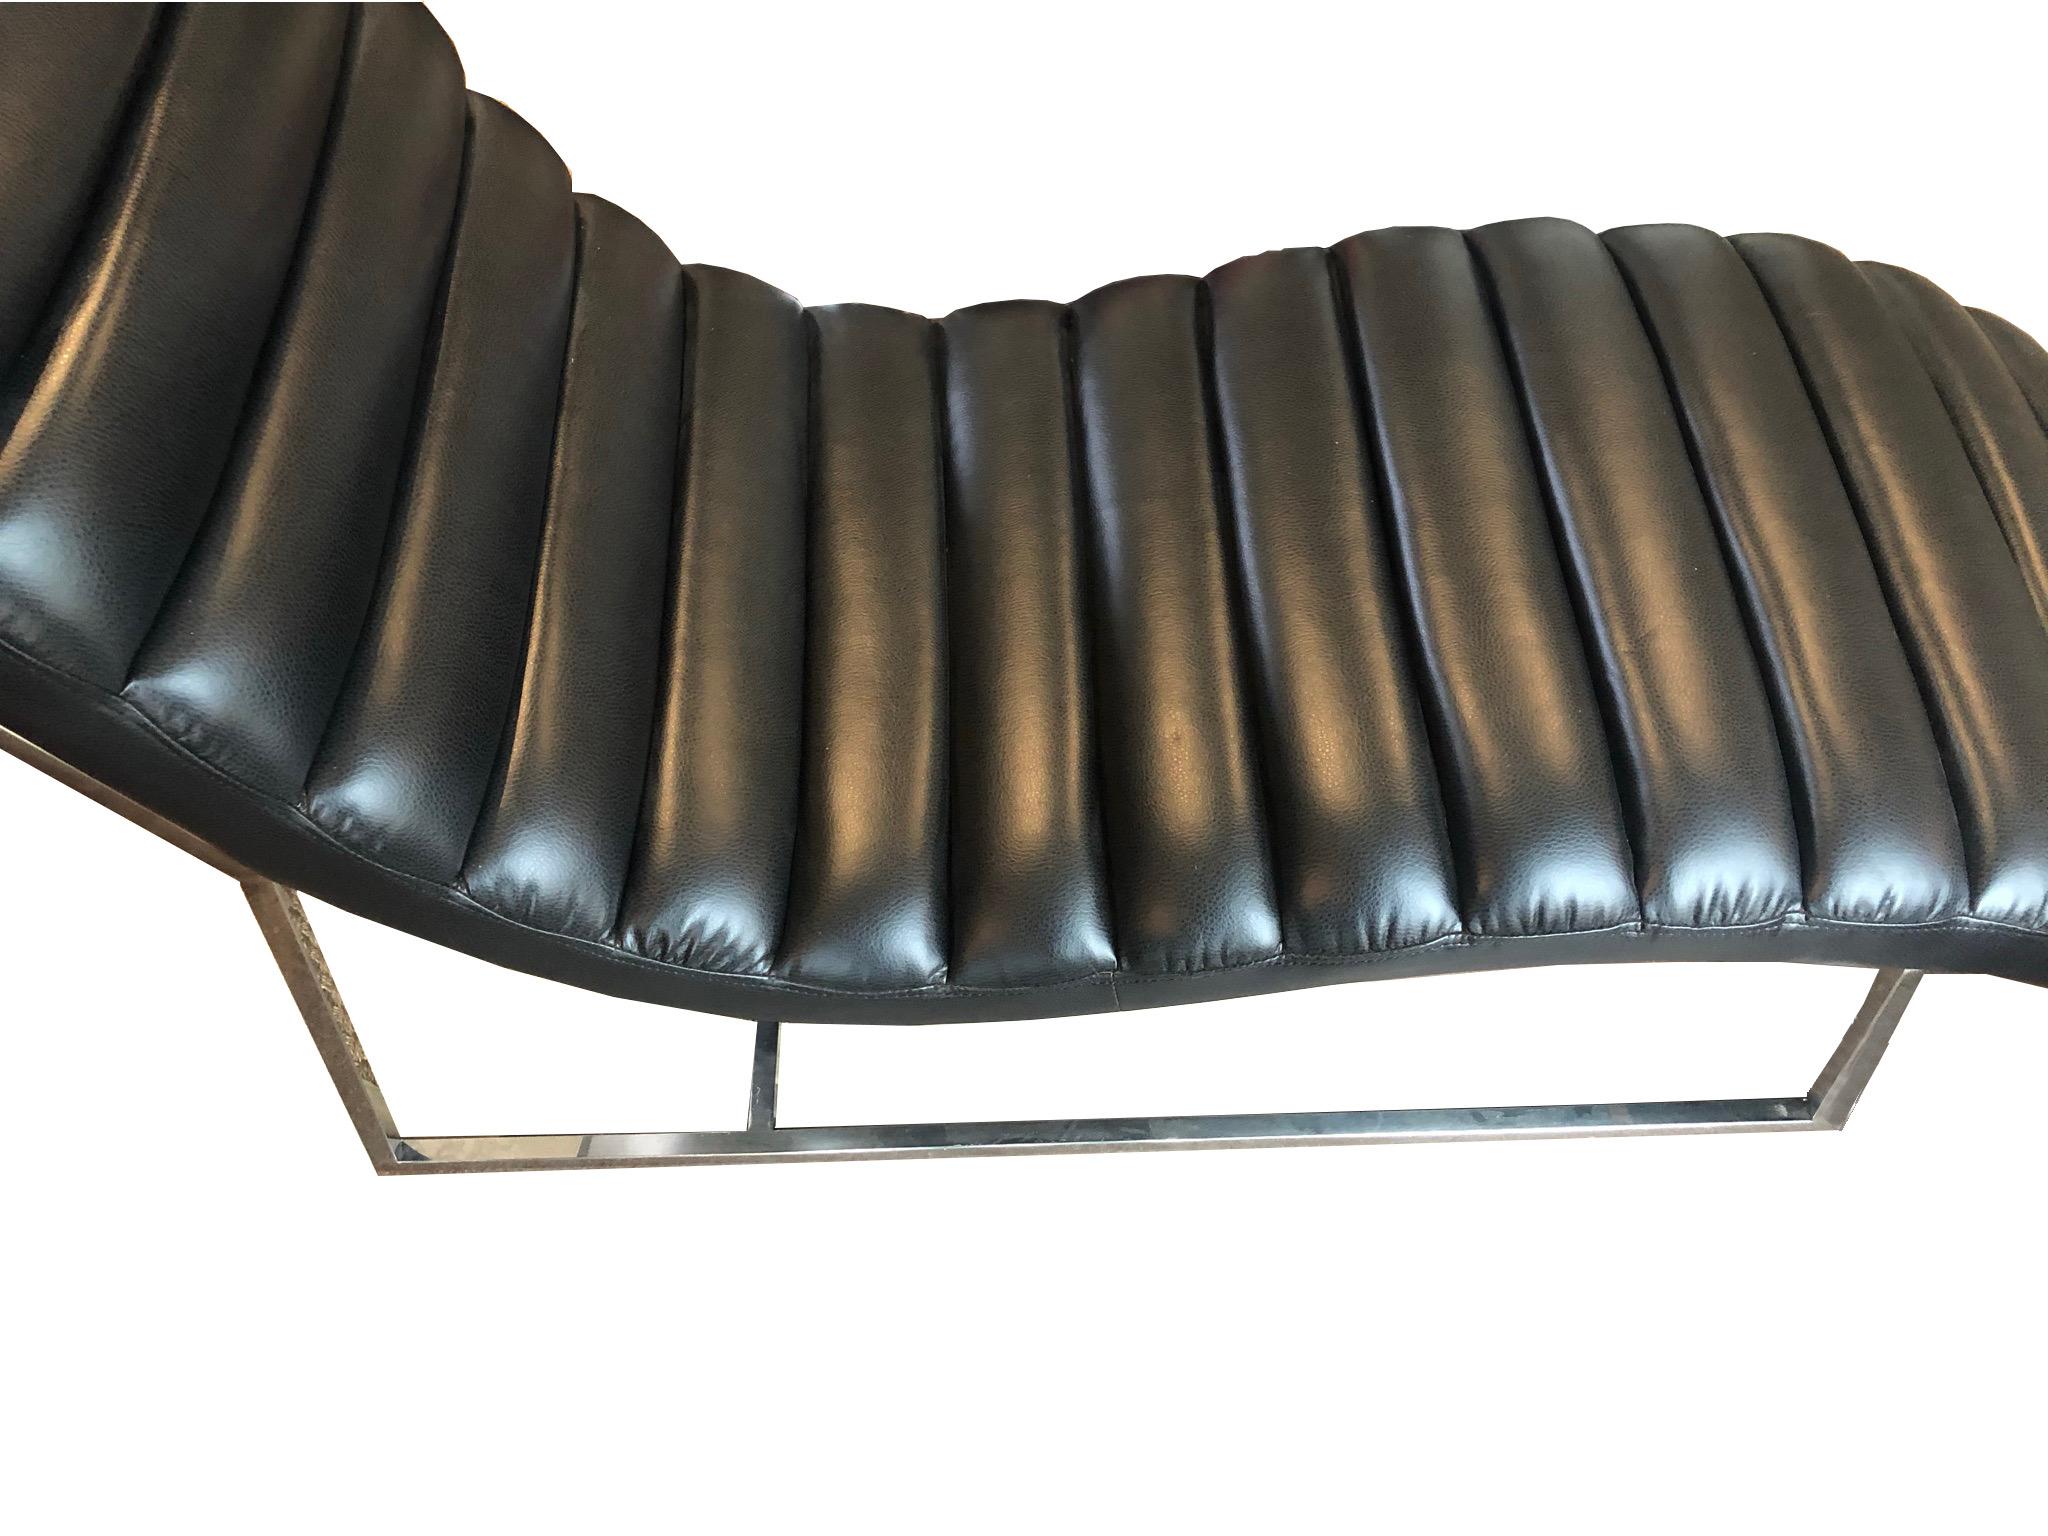 Uber cool channel leather chaise lounge with chrome legs. Modern piece in the style of the midcentury masters such as Le Corbusier. Excellent condition and wonderfully comfortable, this chaise is perfect for any place one wants to be stylish or take